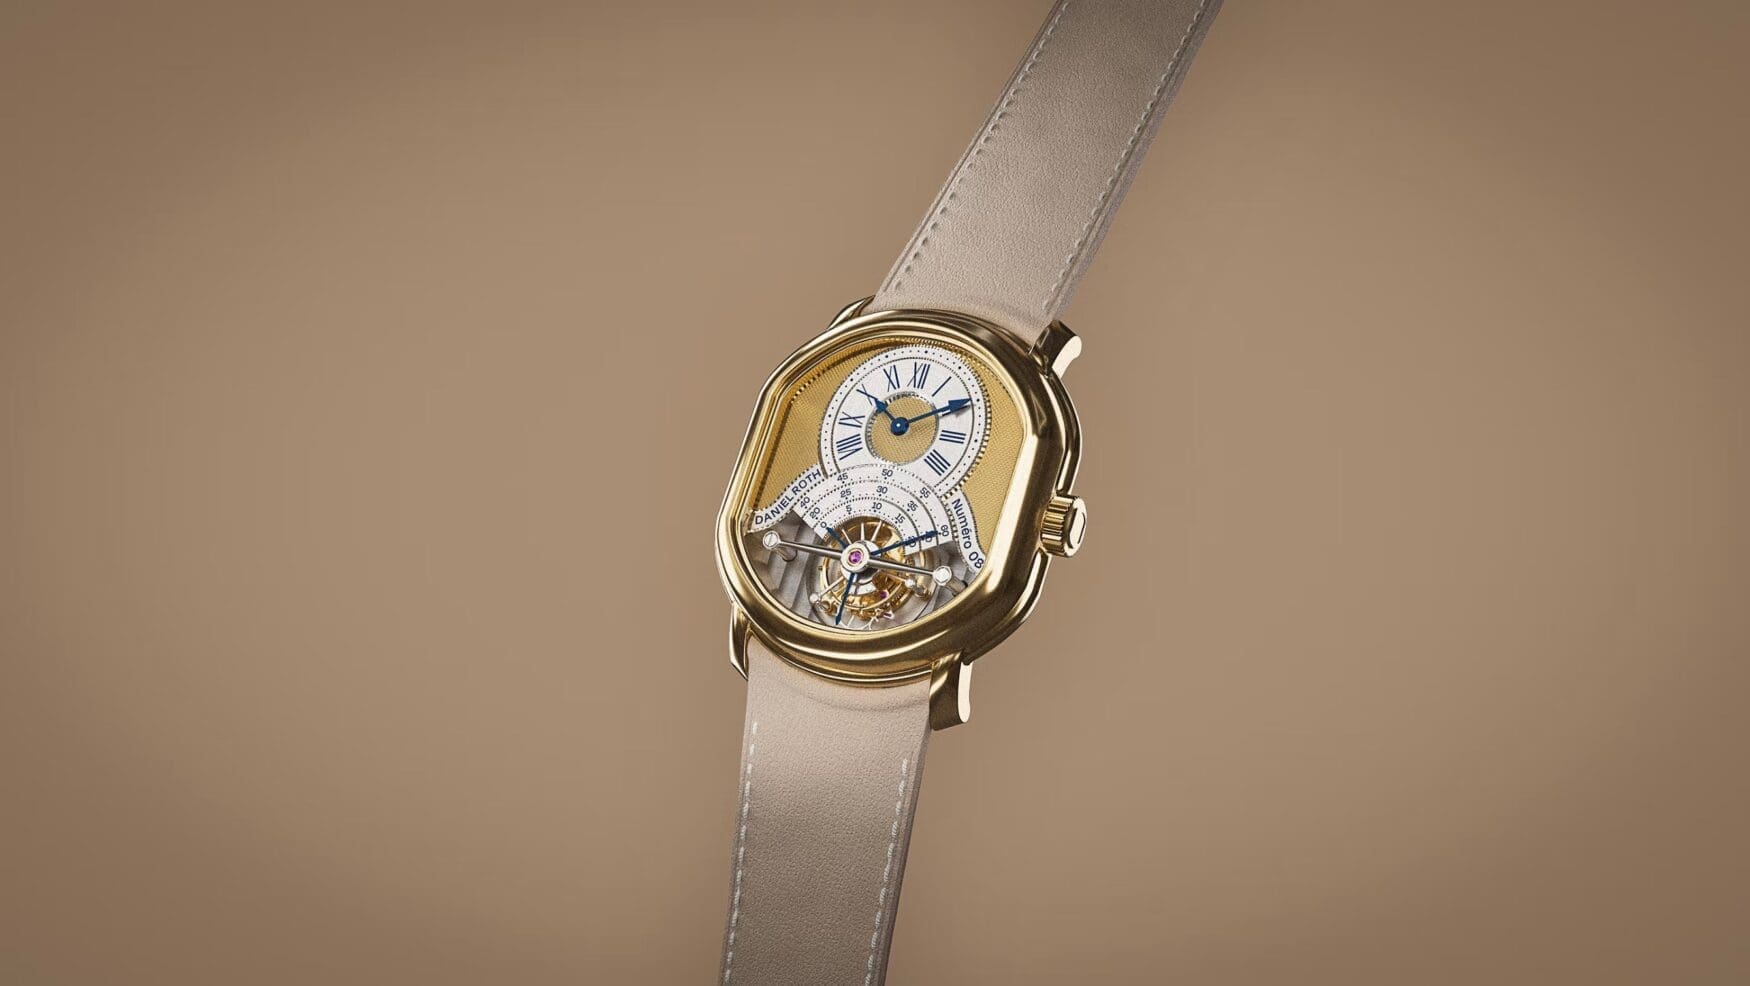 Daniel Roth is back with the Tourbillon Souscription (and LVMH)